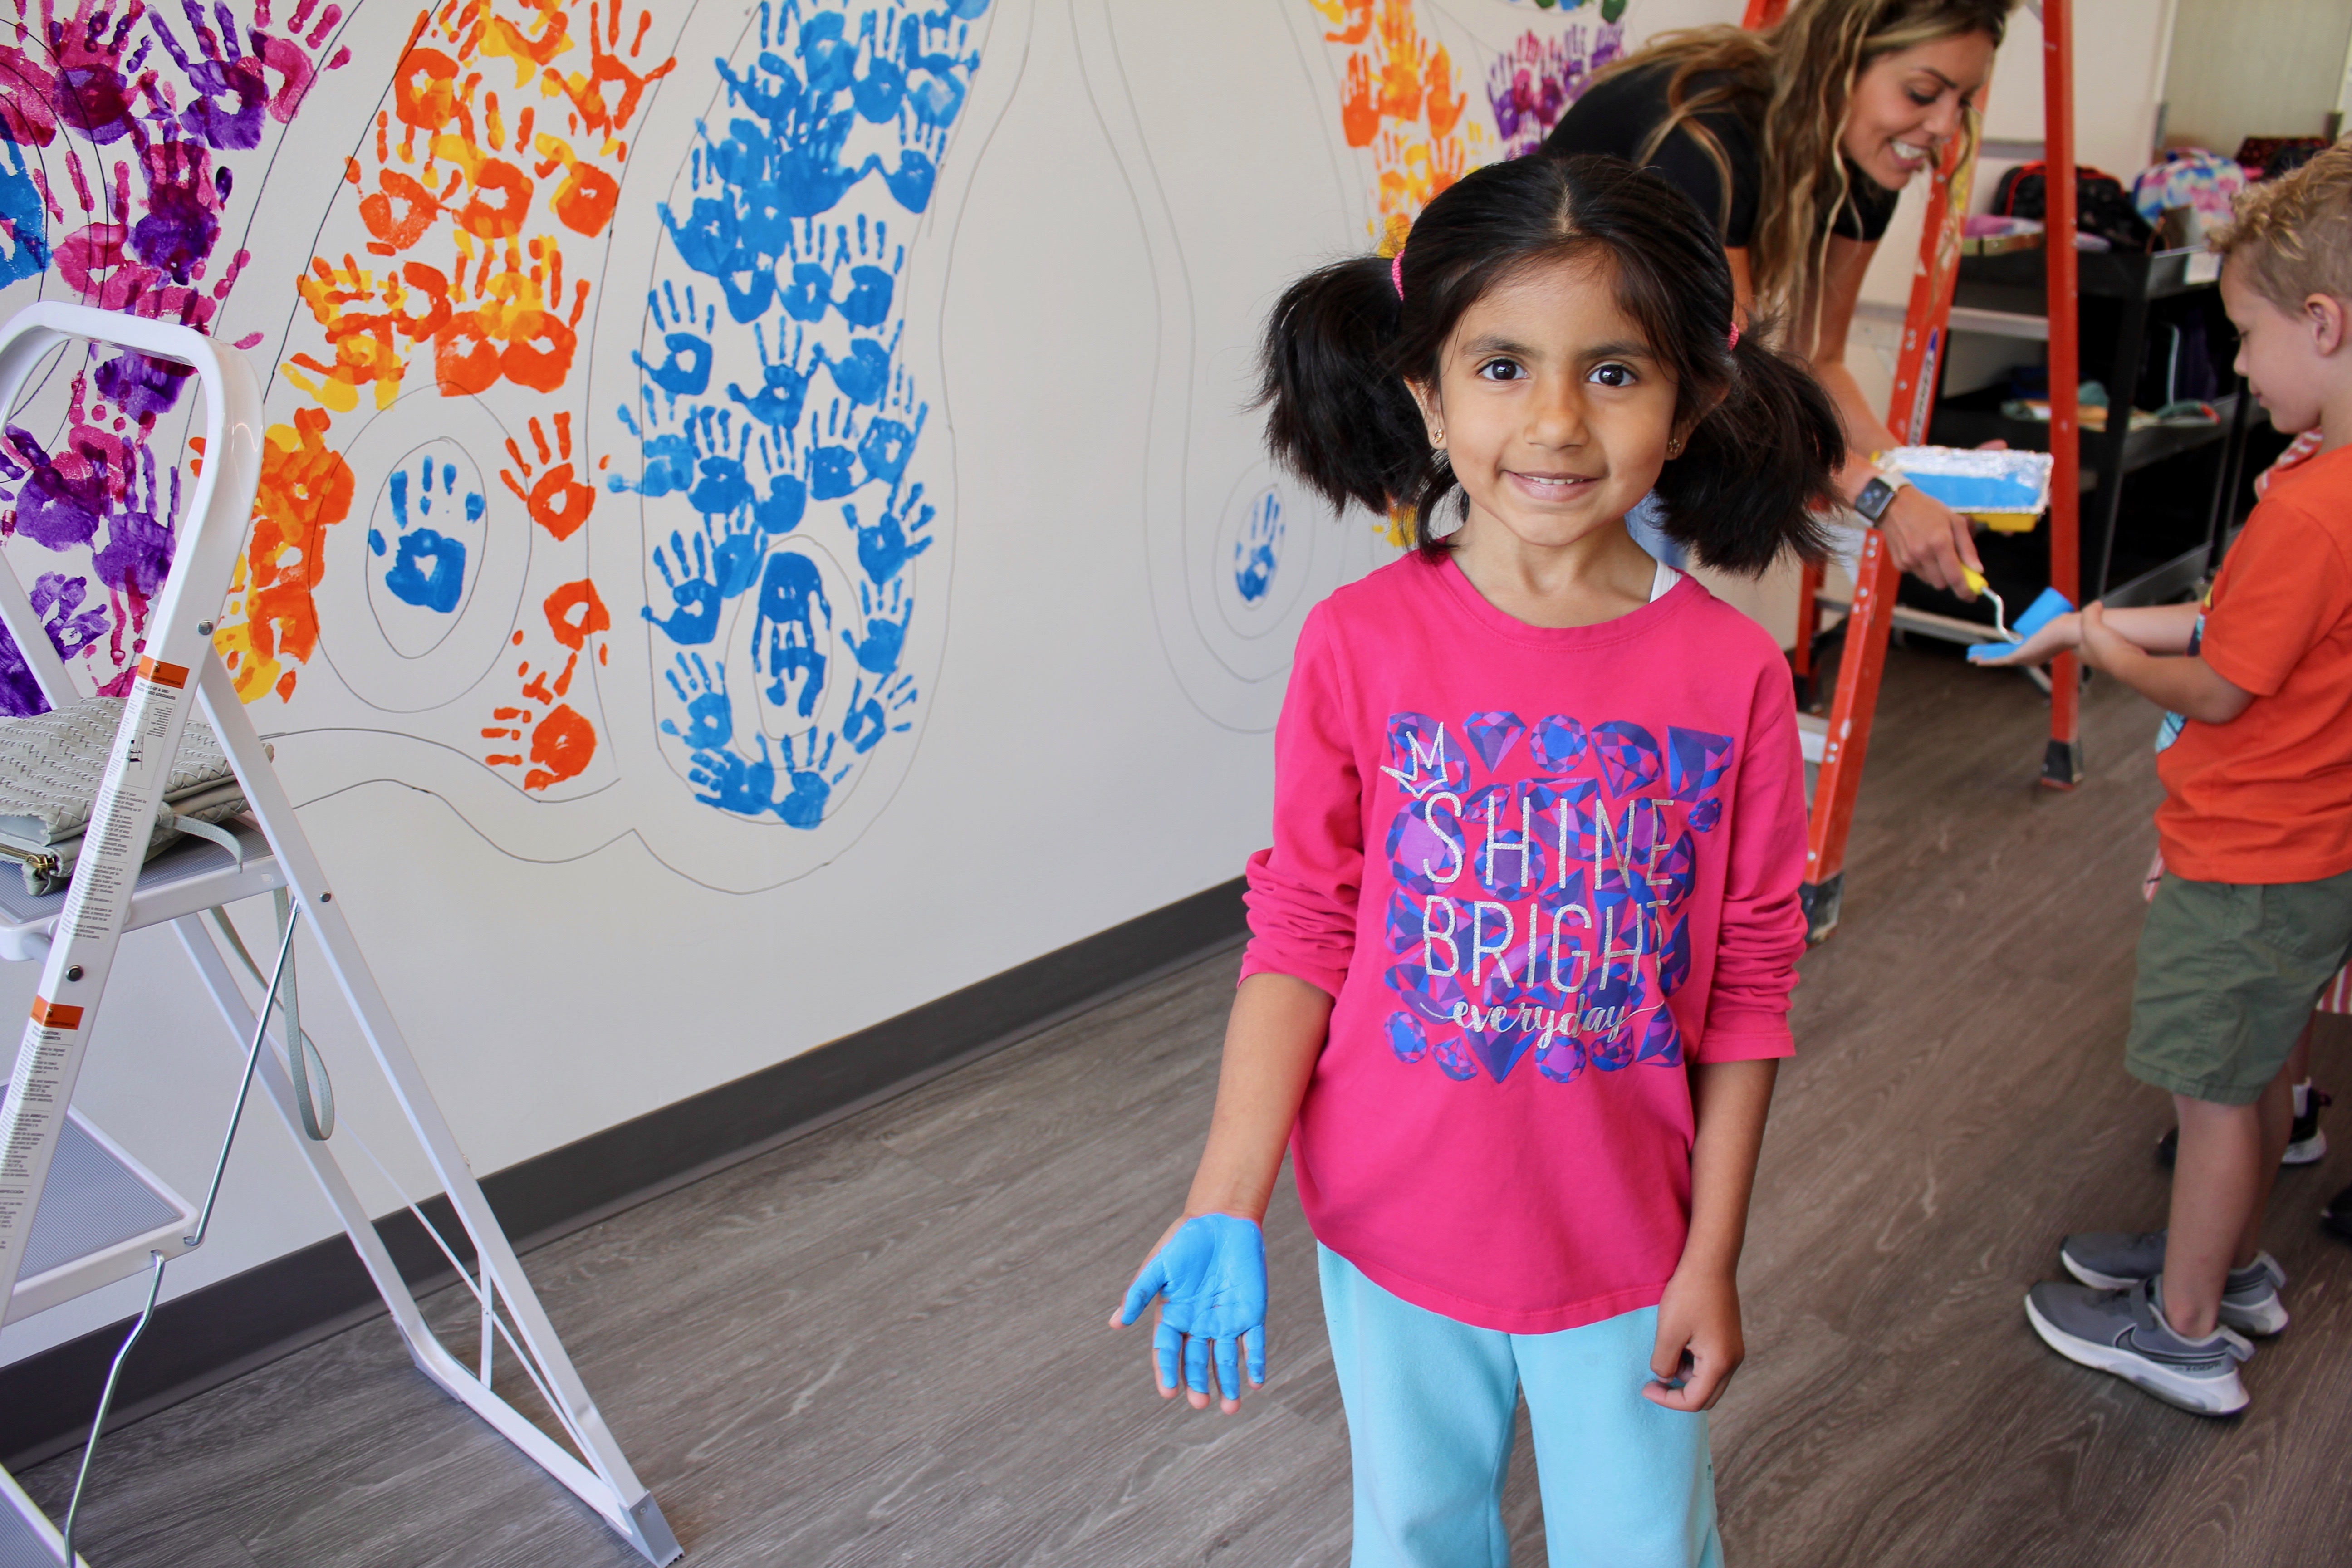 A student posing in front of the mural after placing a handprint